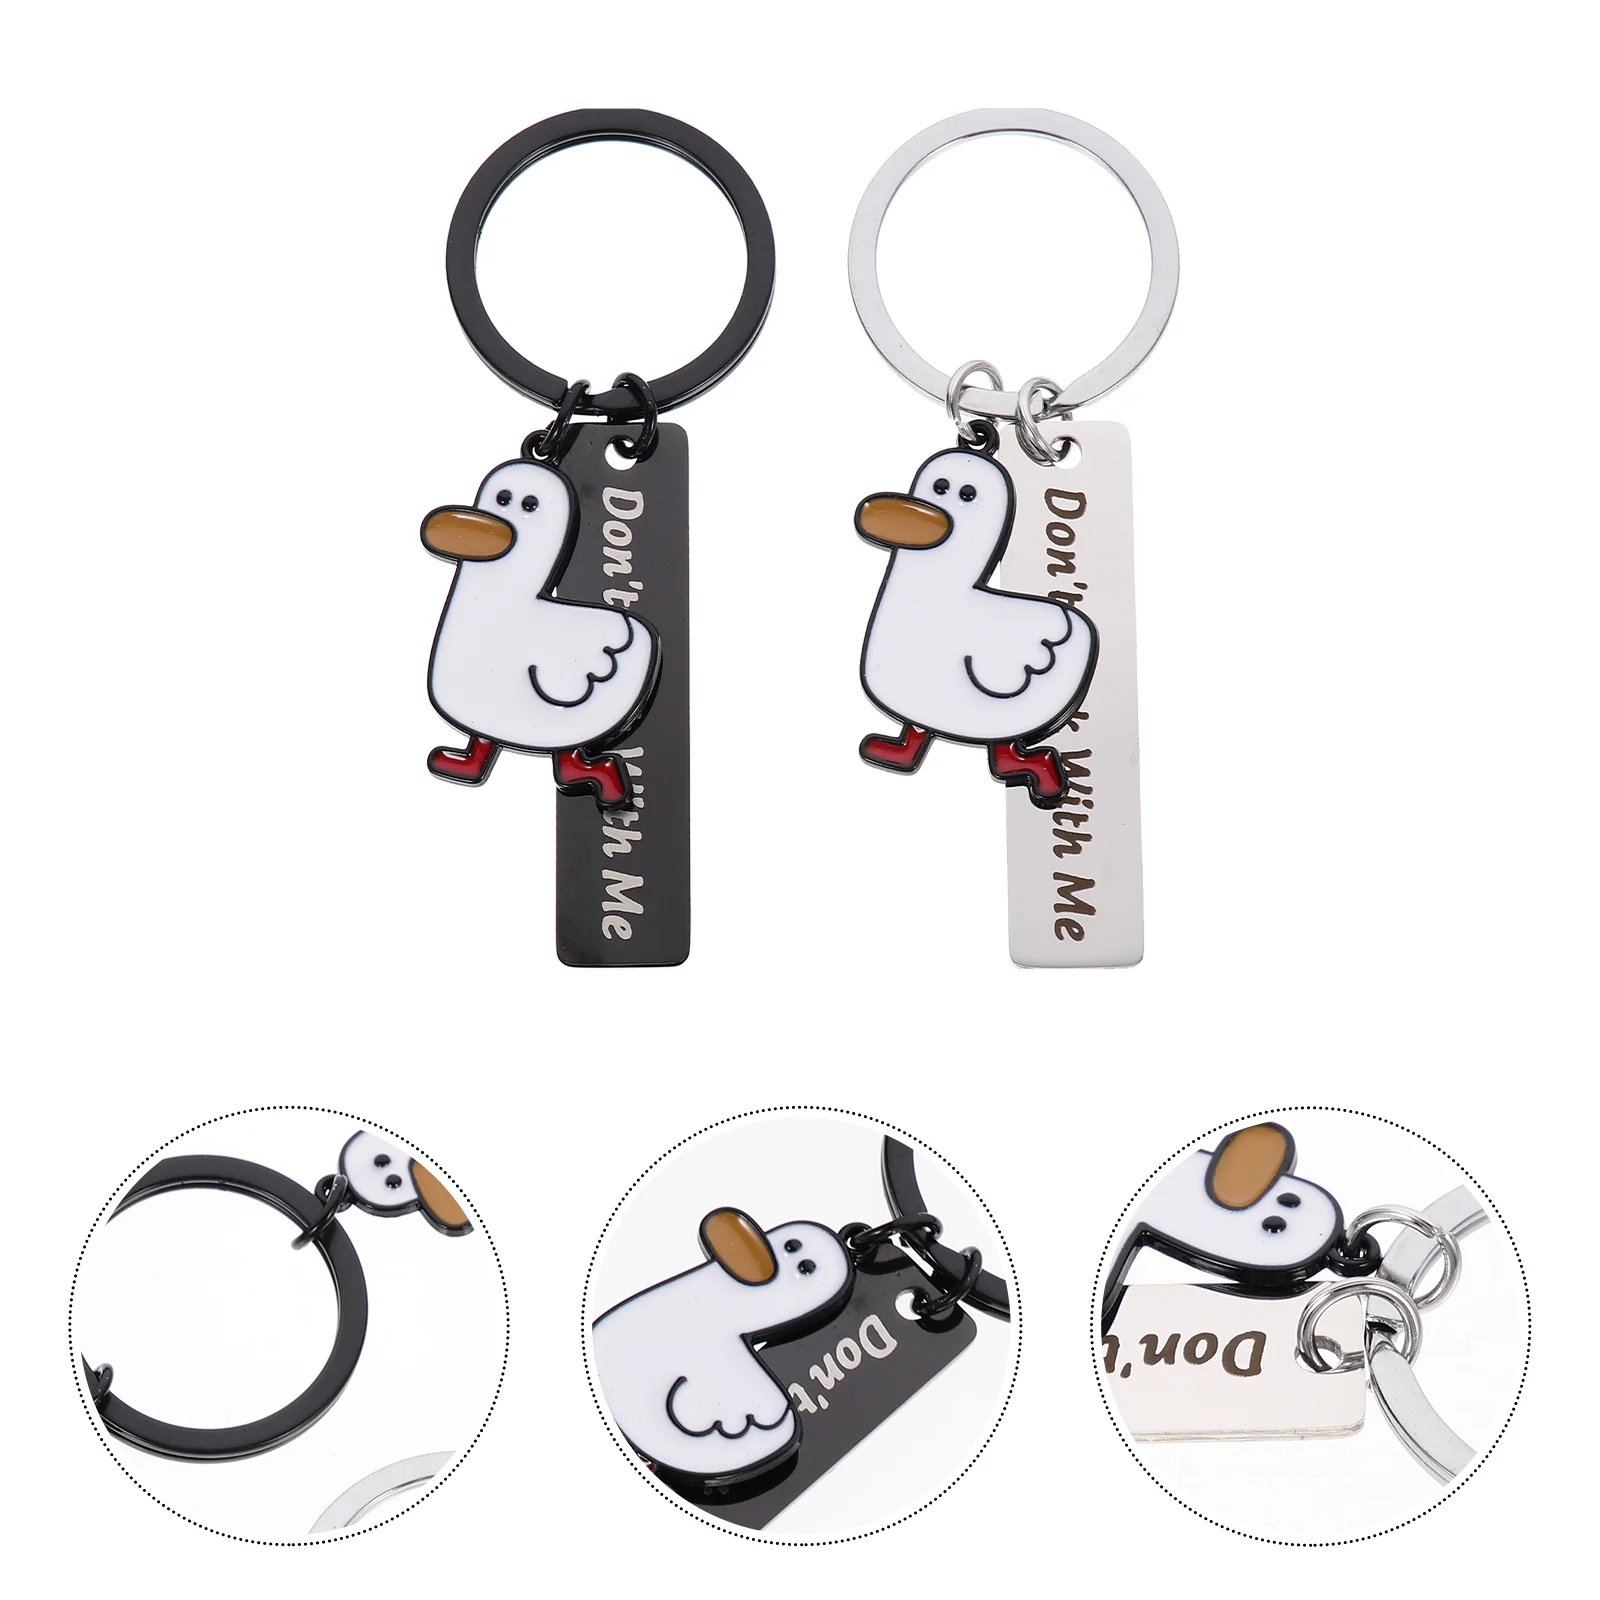 

2 Pcs Mamaw Gifts Key Chain Duck Chains Magazine Stylish Keychians Ornaments Keychains For Girlss Design Mother